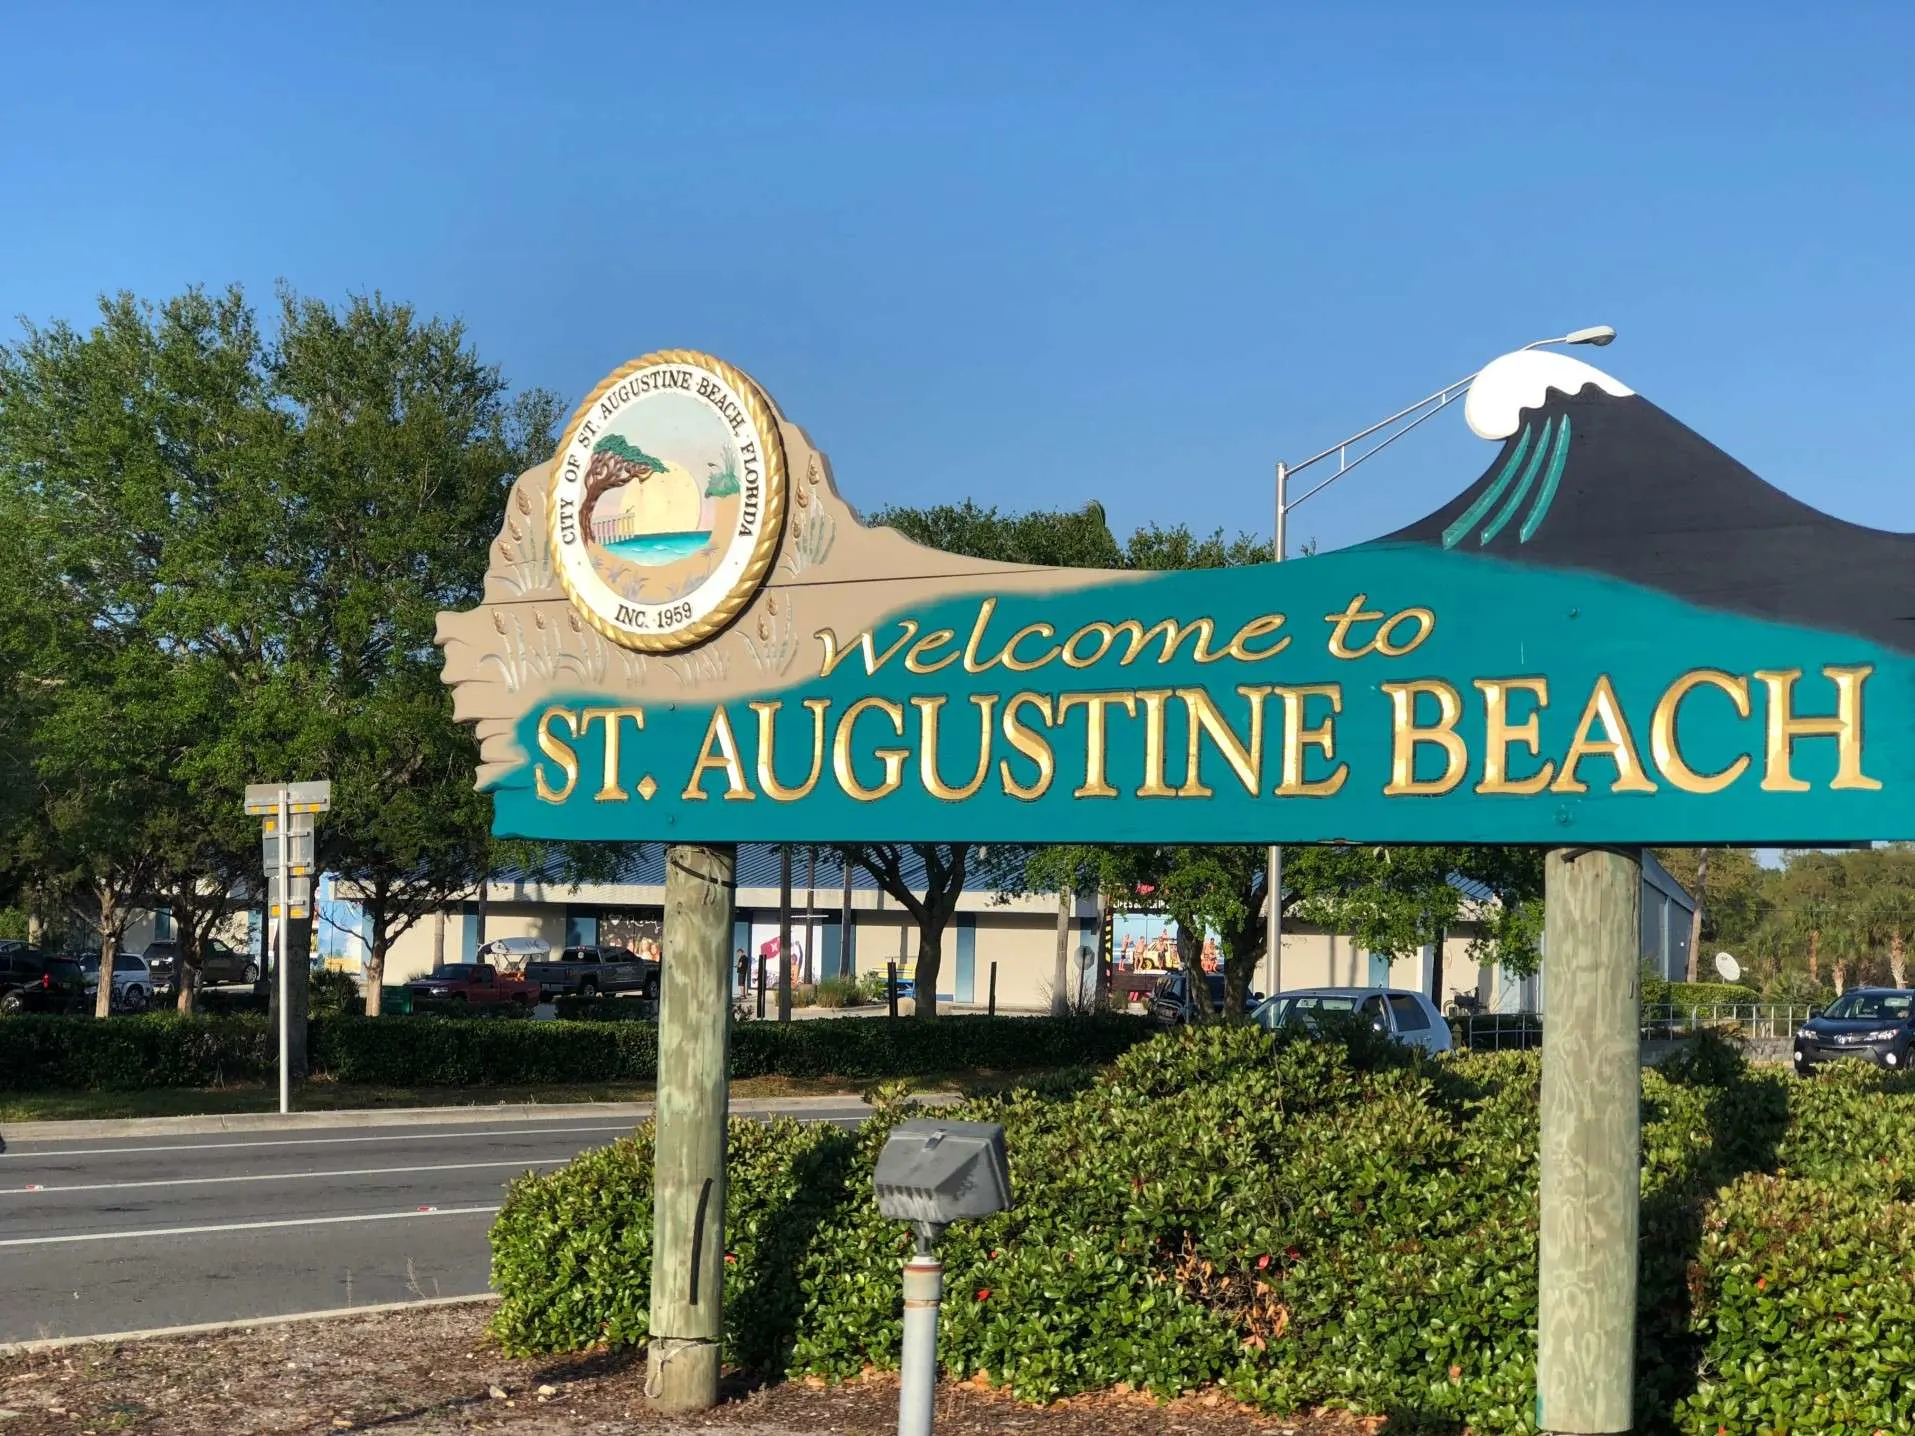 Welcome to St. Augustine Beach sign